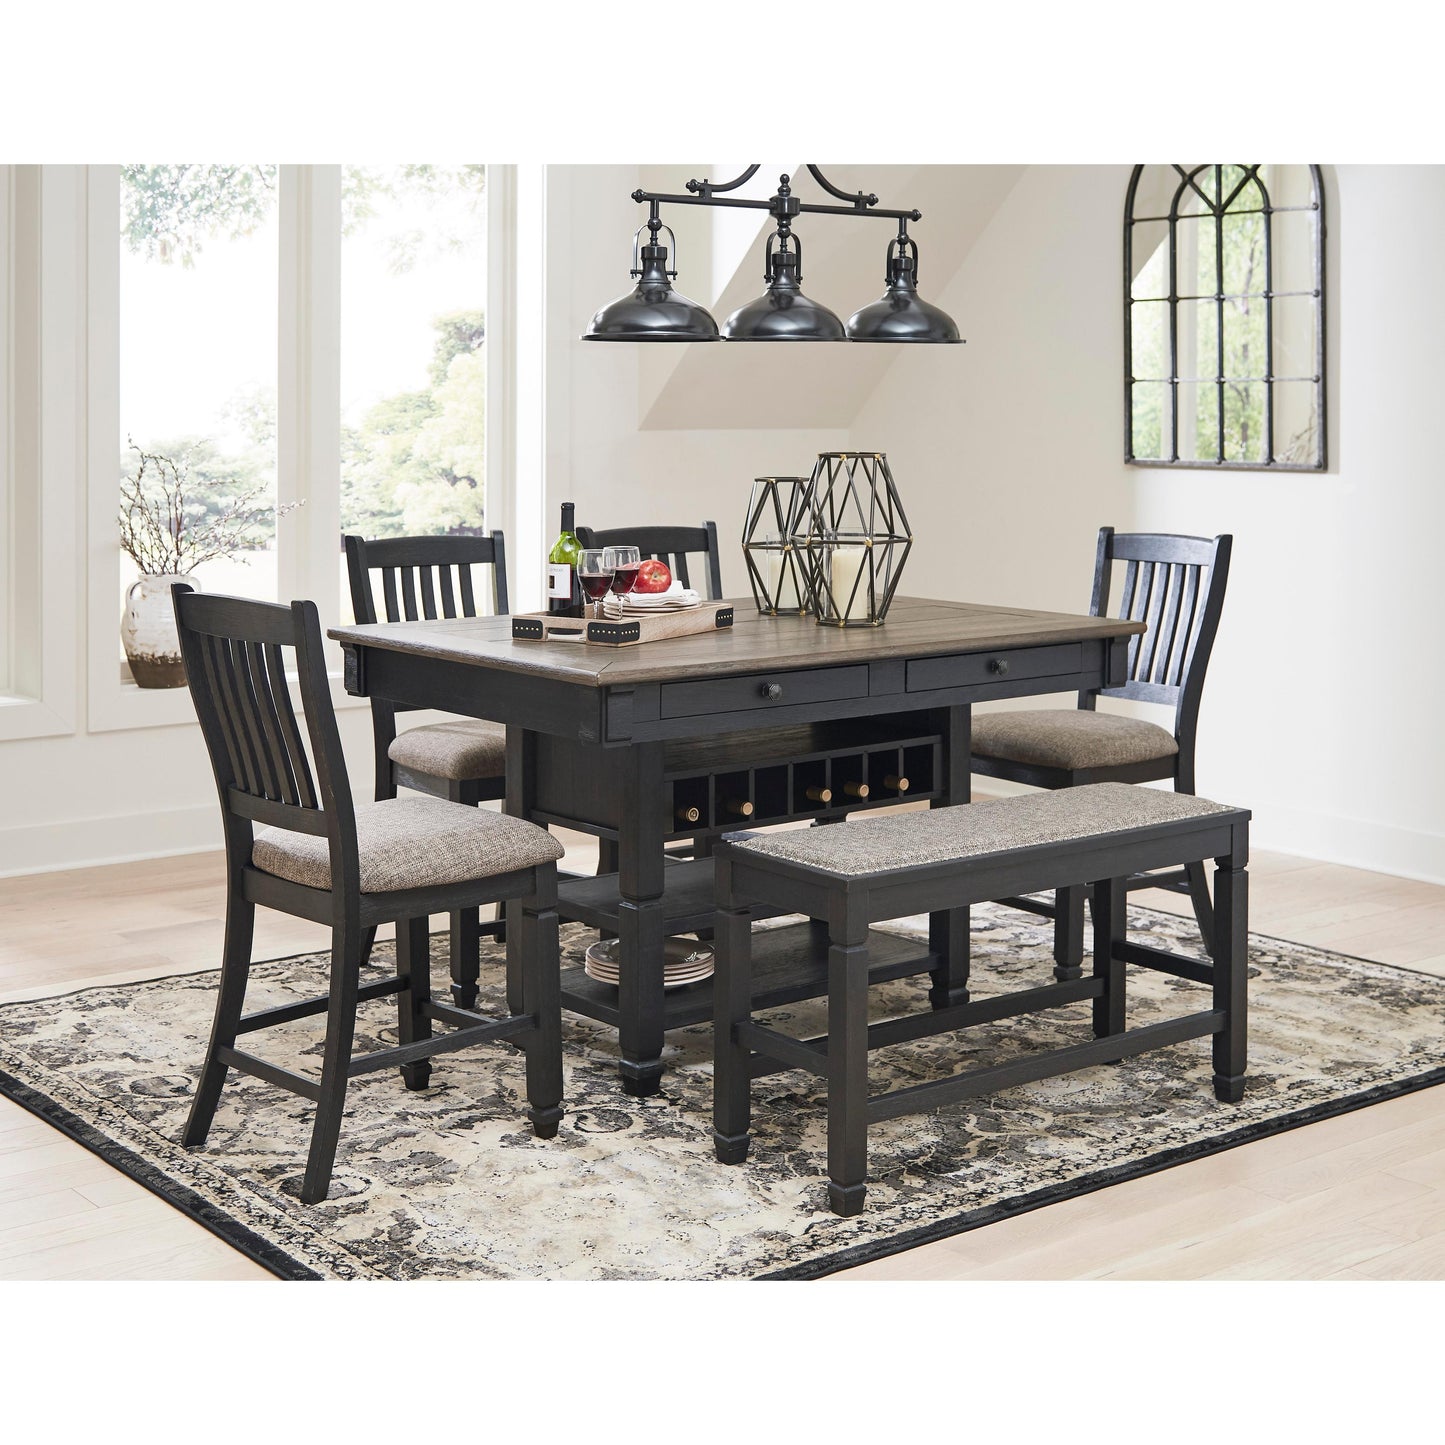 Signature Design by Ashley Tyler Creek D736D3 6 pc Counter Height Dining Set